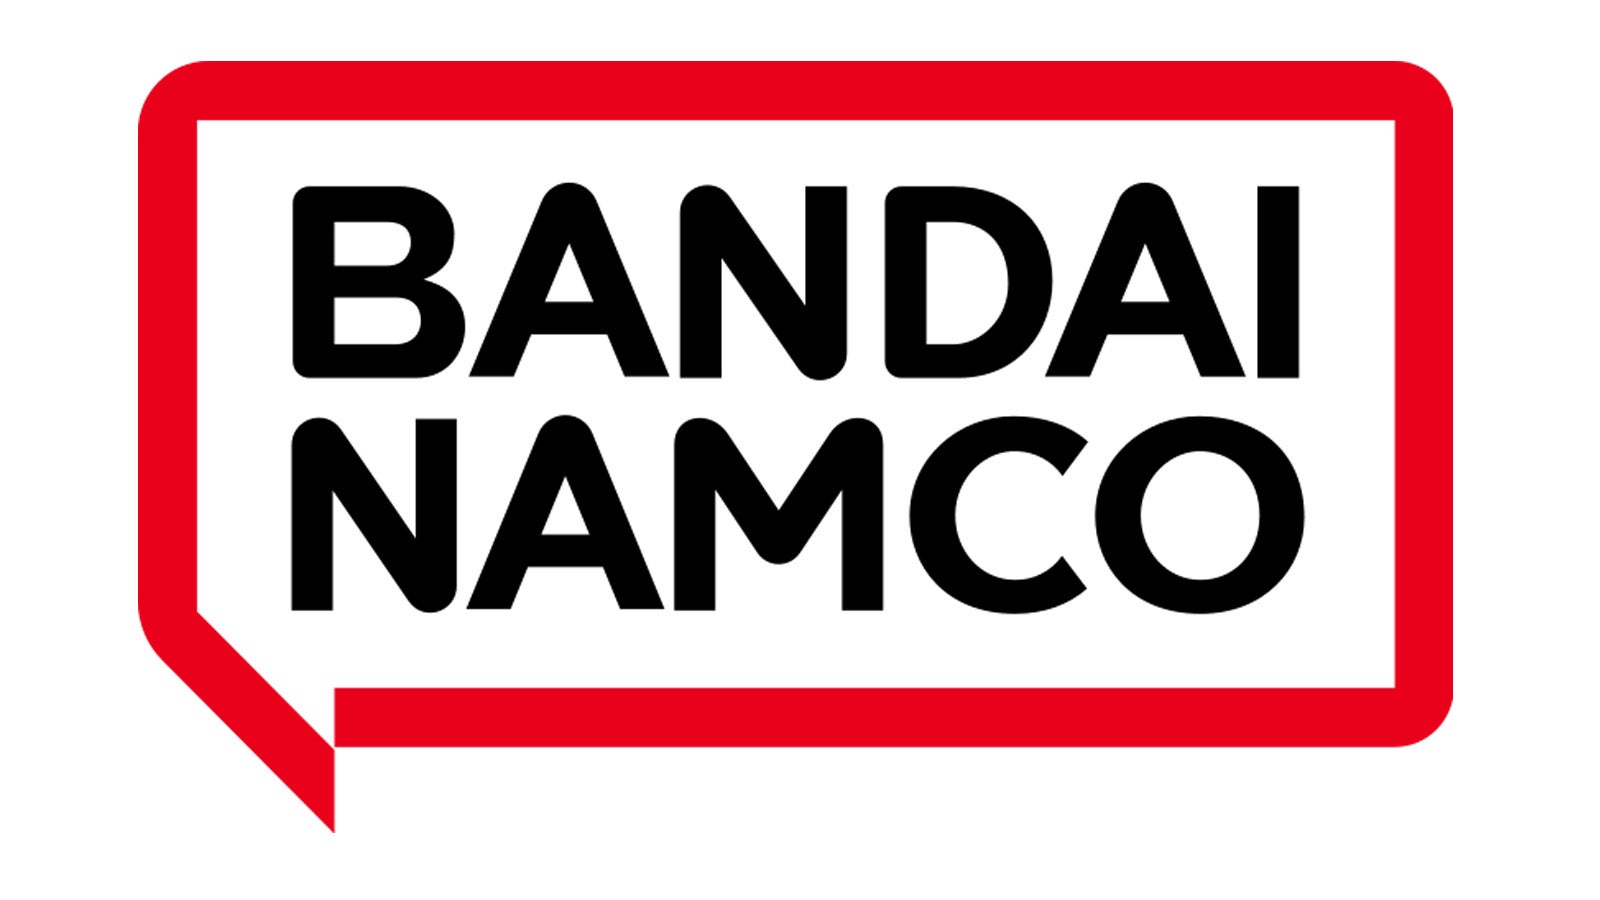 Elden Ring publisher Bandai Namco confirms it was hacked